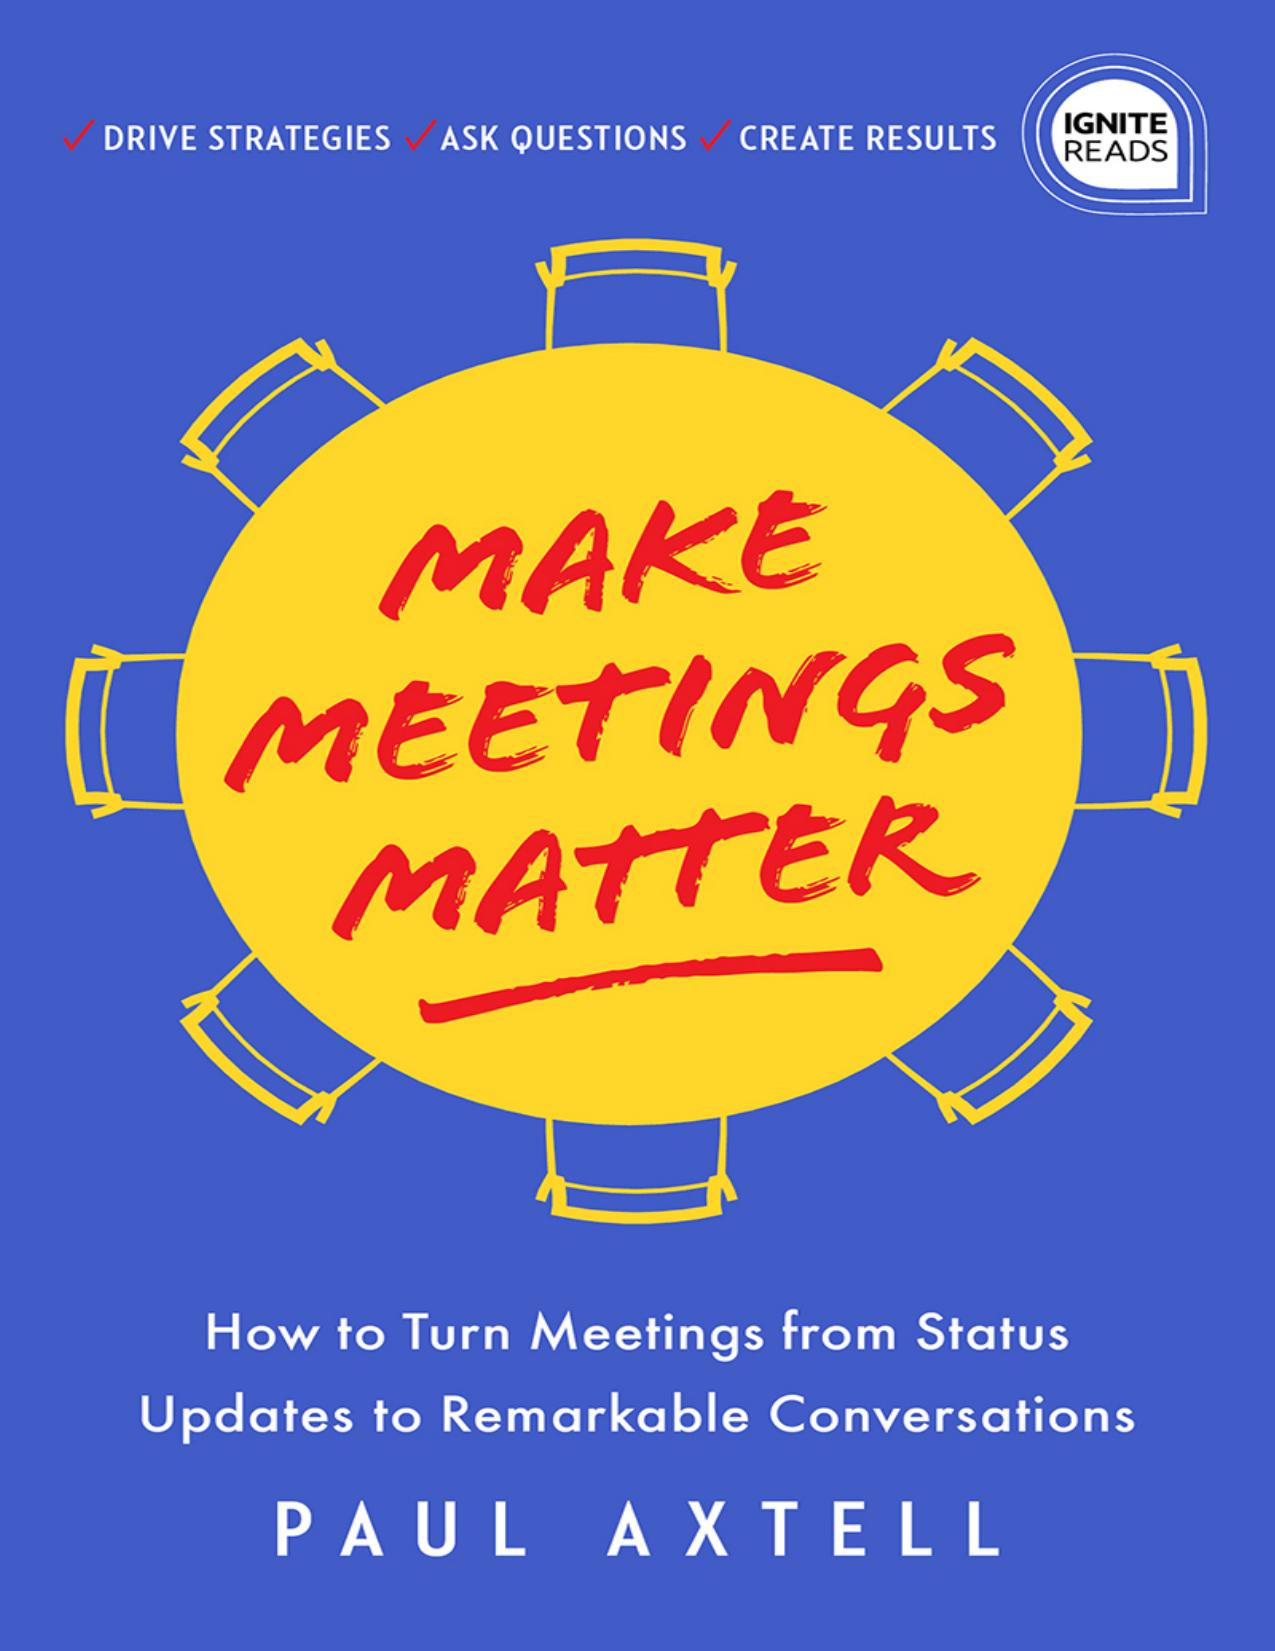 Make Meetings Matter by Paul Axtell